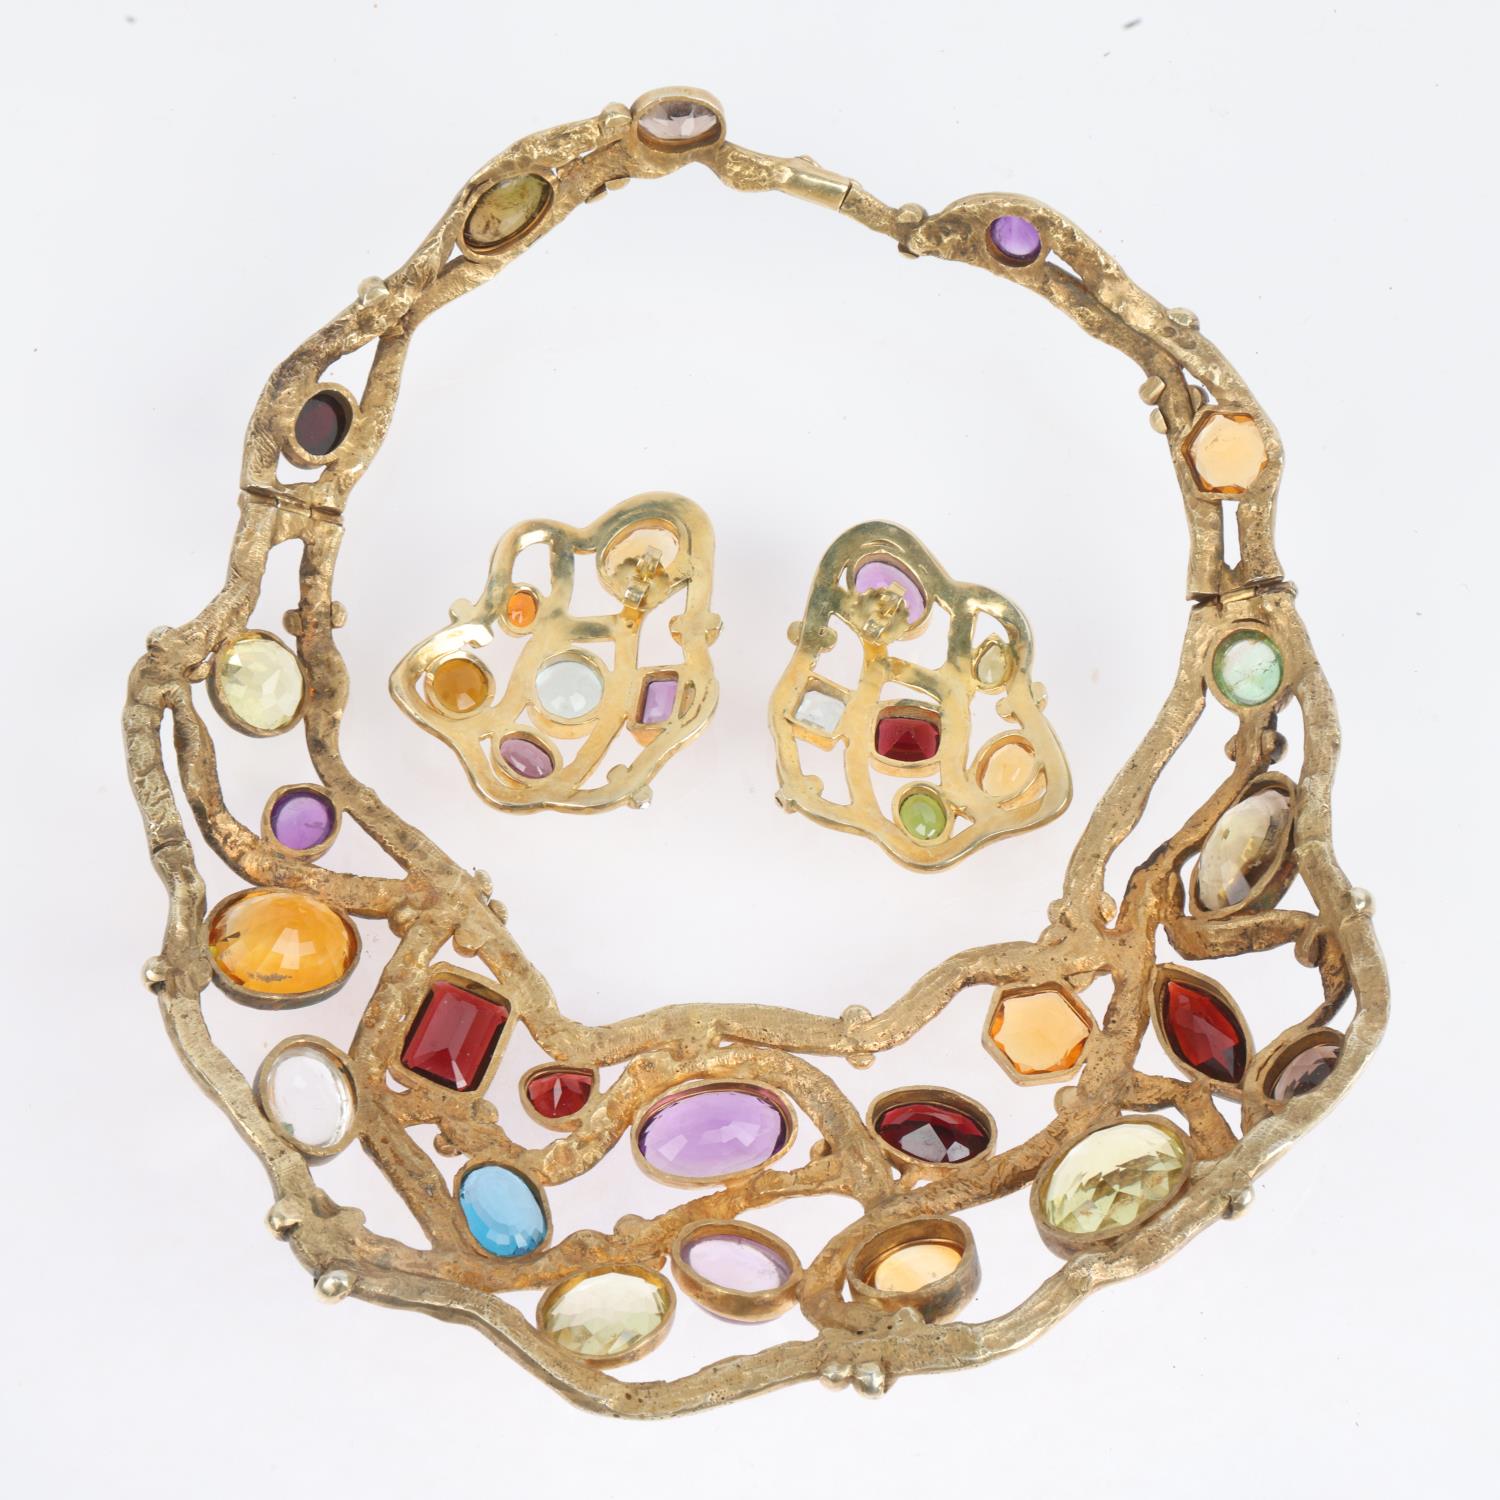 A heavy quality solid silver-gilt gem set collar bib necklace and earring set, by Peter Farrow, - Image 4 of 4